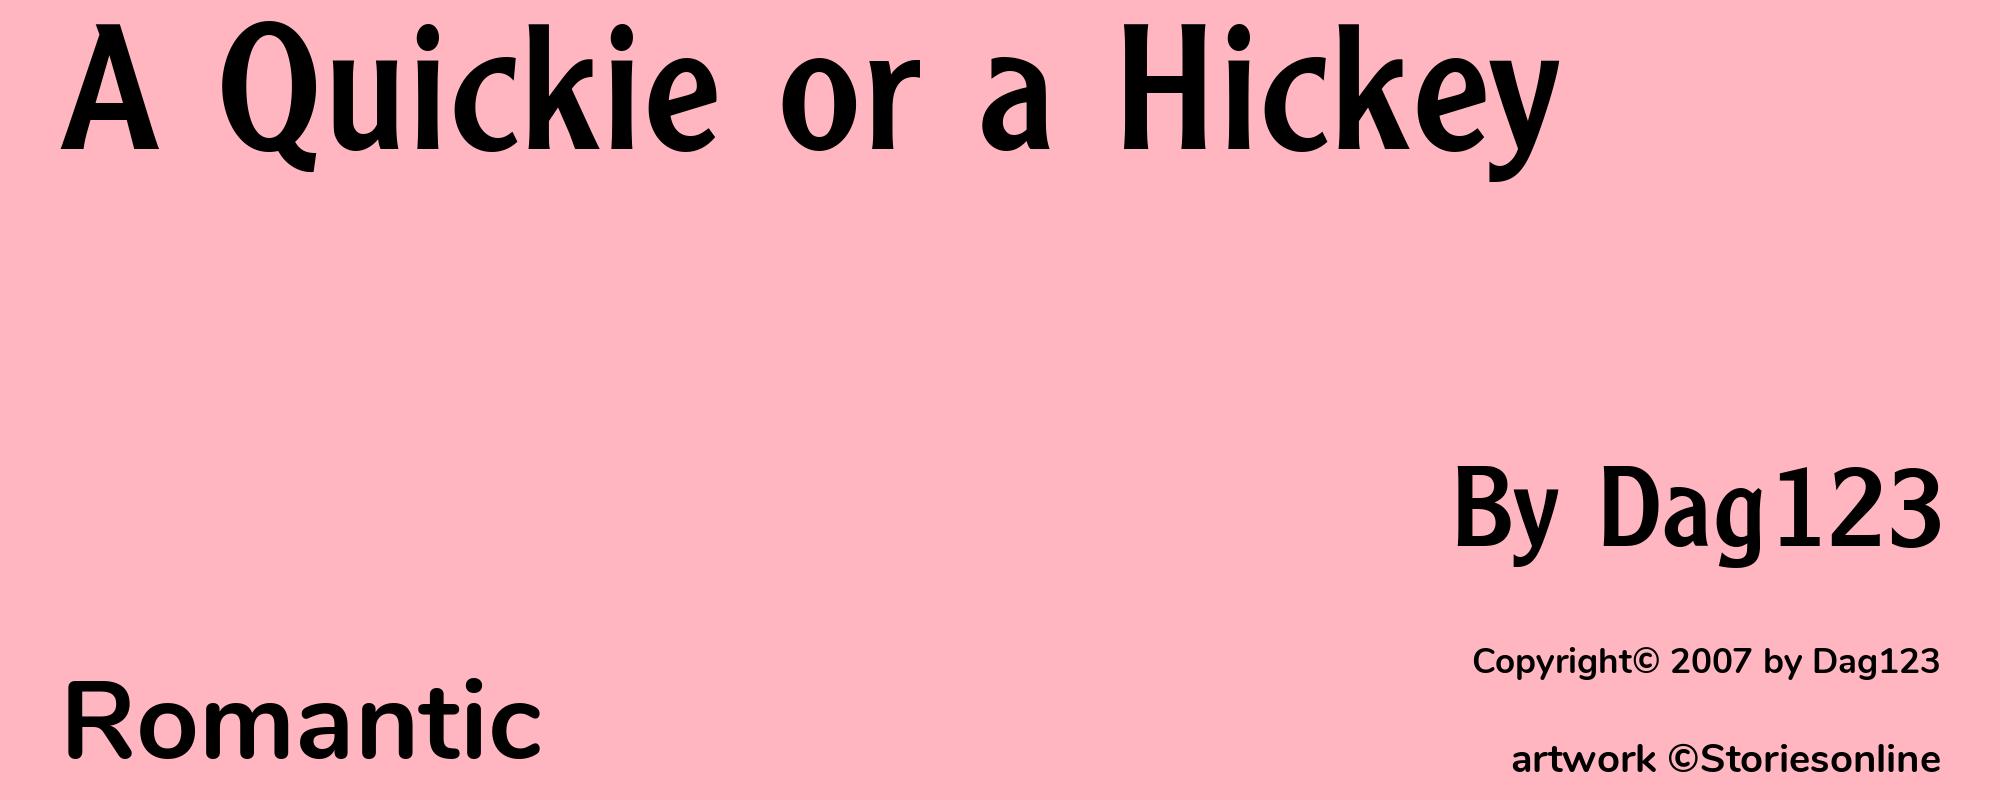 A Quickie or a Hickey - Cover